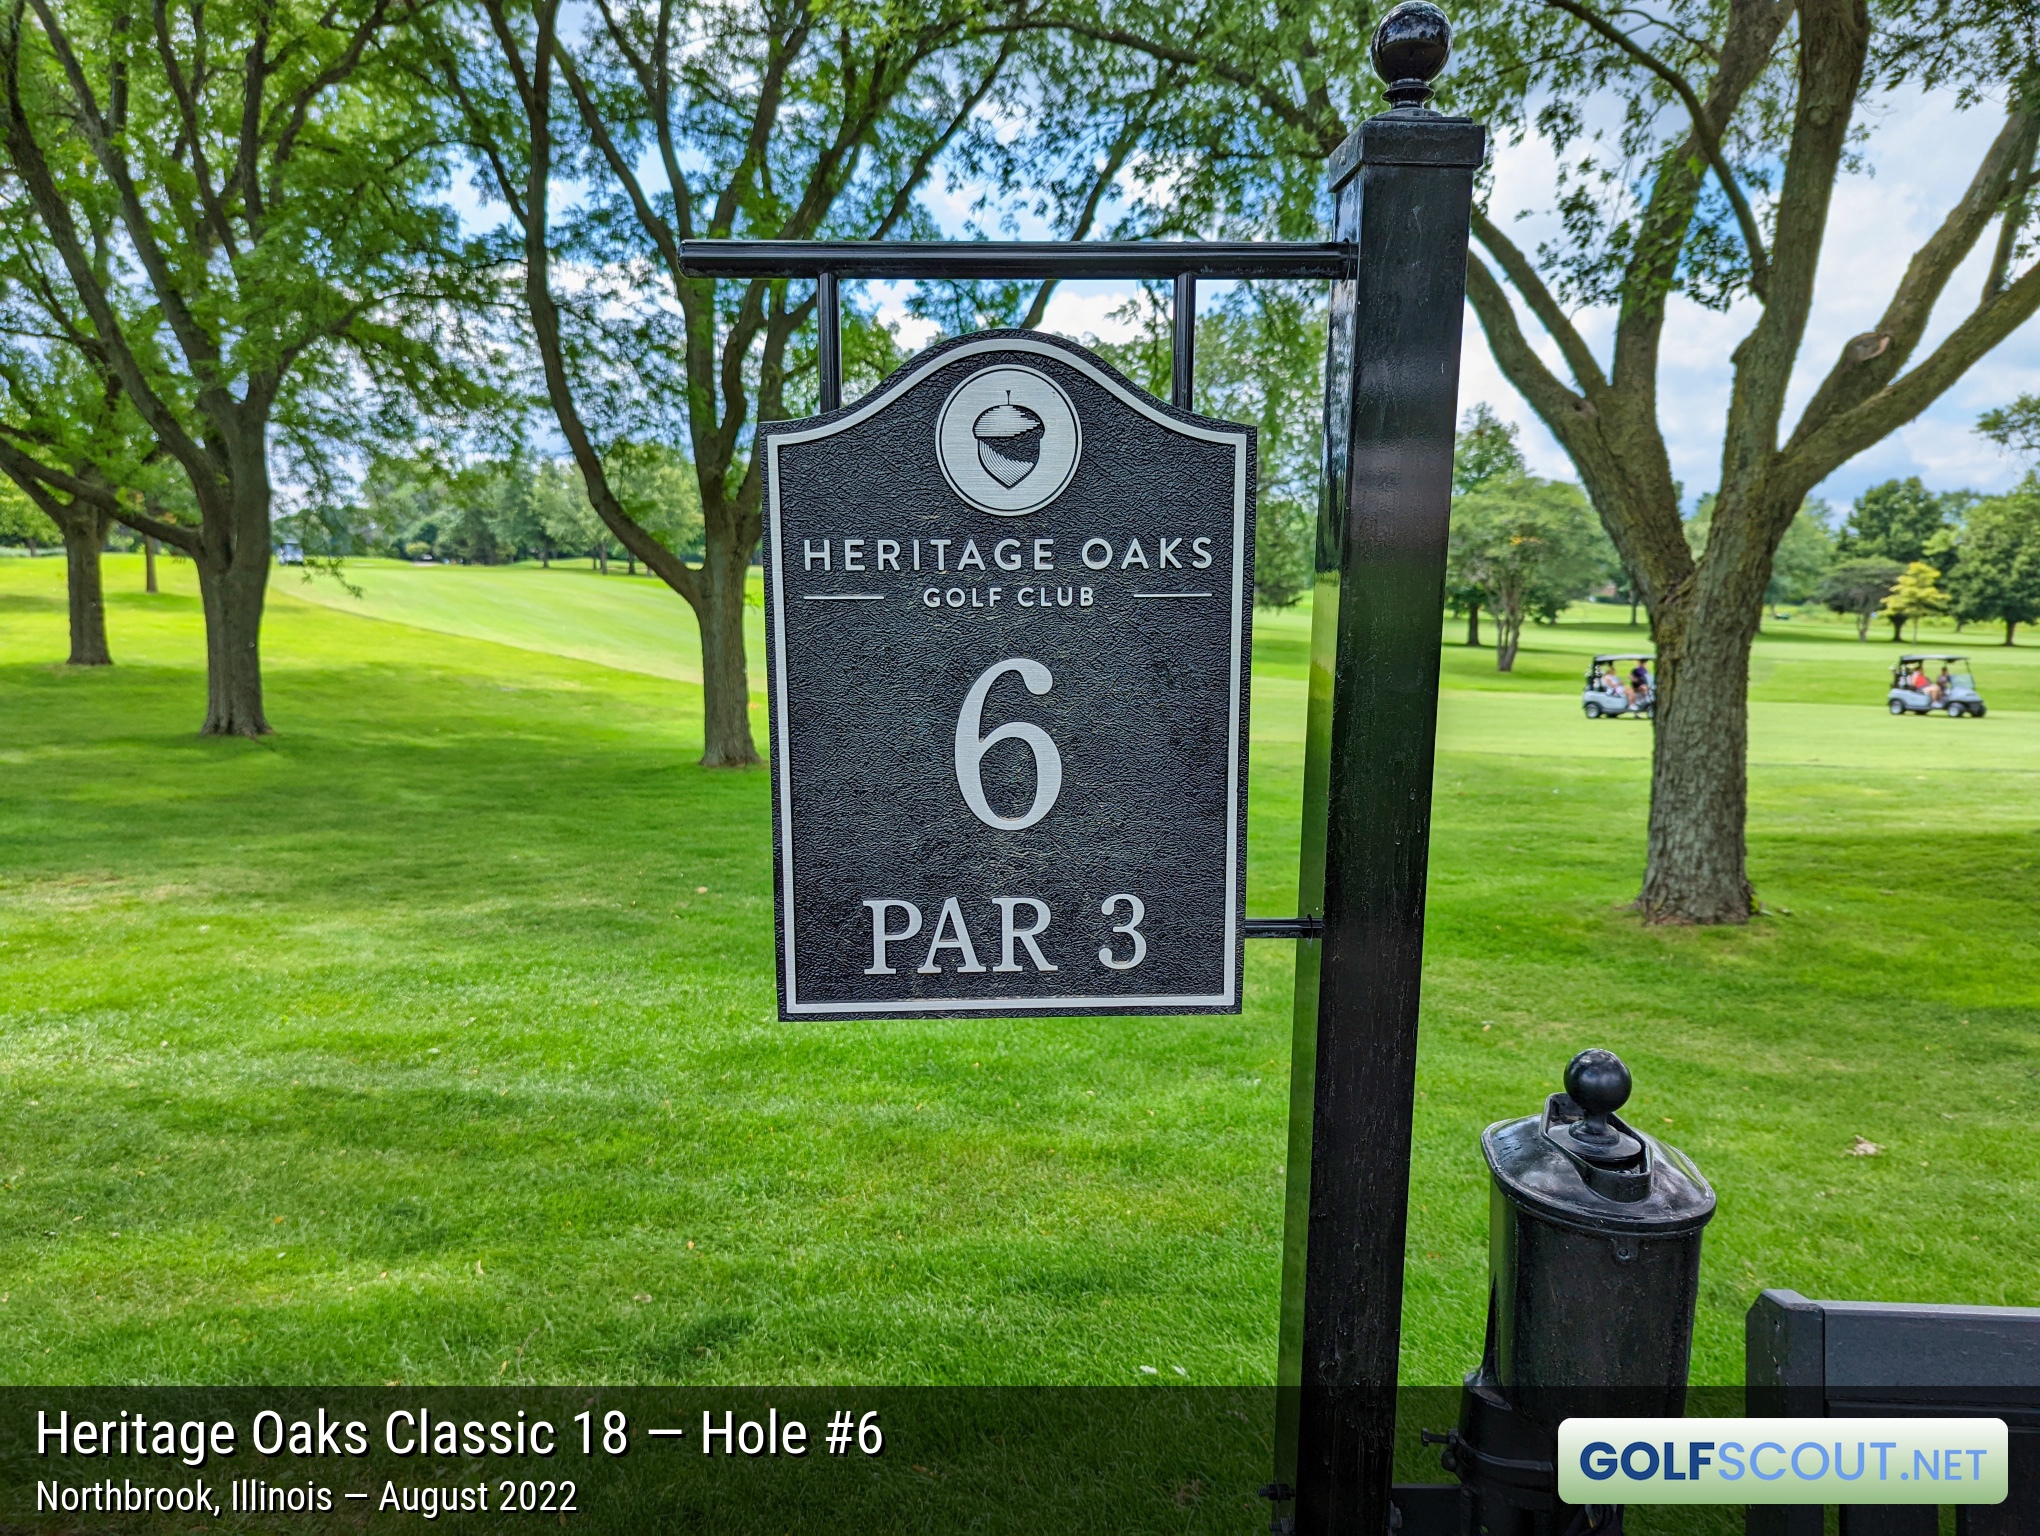 Photo of hole #6 at Heritage Oaks Golf Club - Classic 18 in Northbrook, Illinois. 